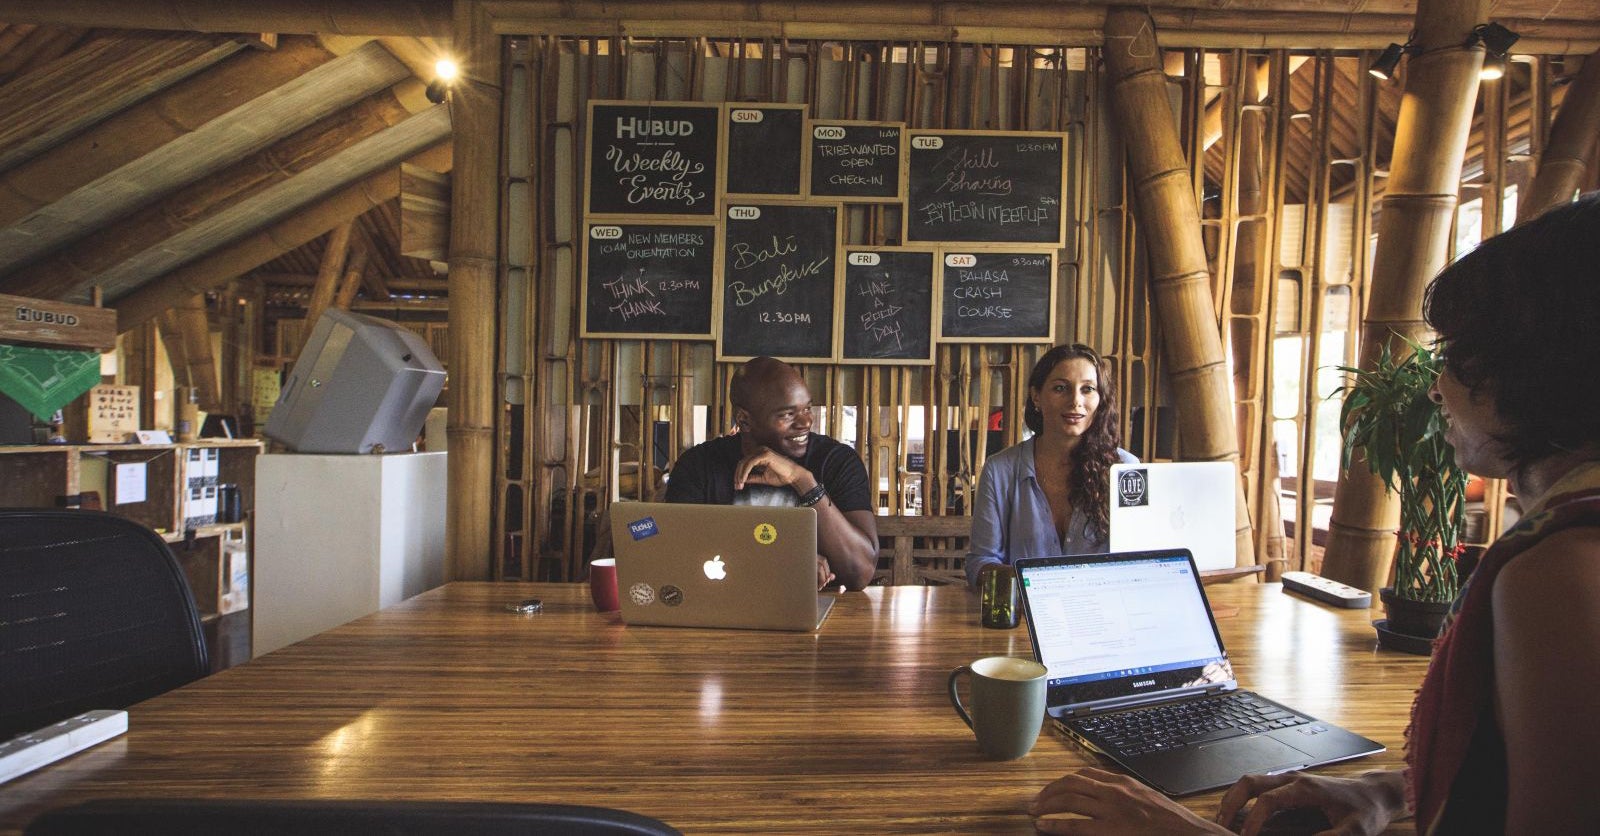 co-working space Hubud, located in Bali